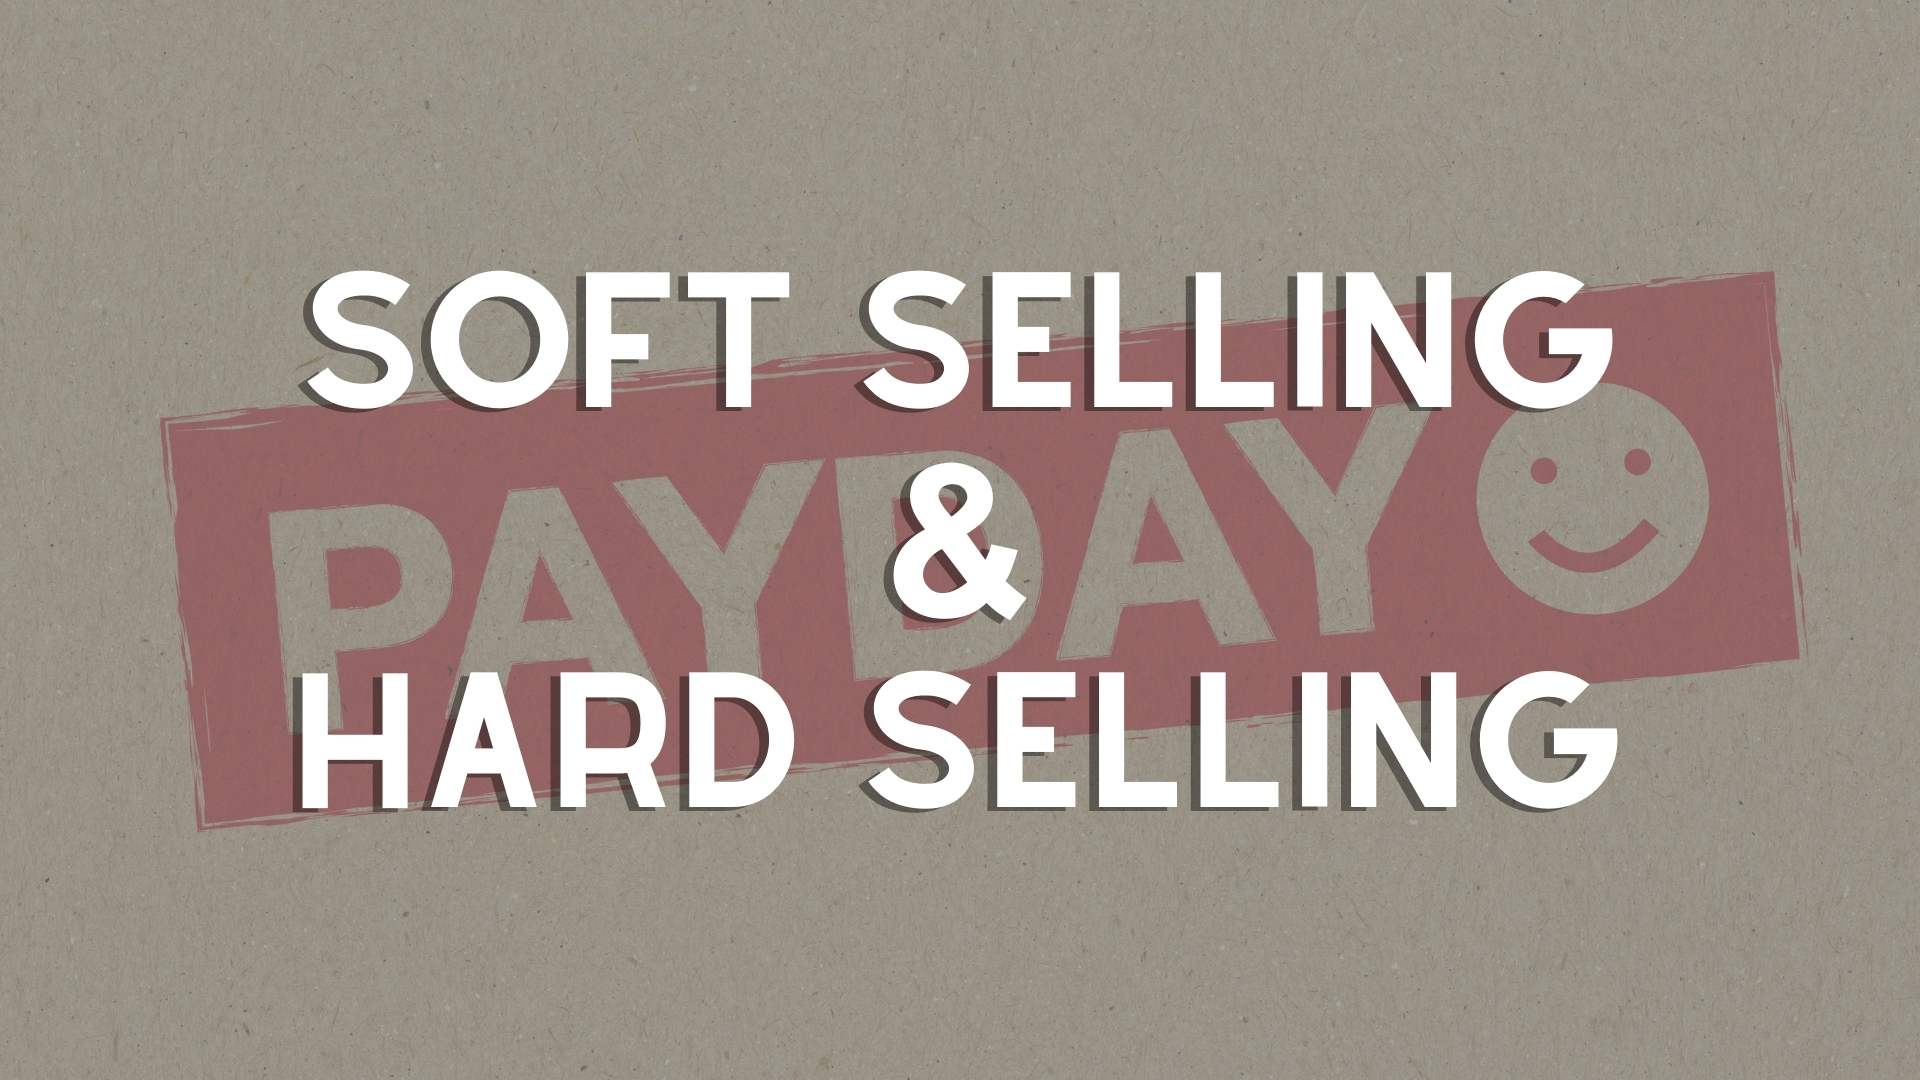 SOFT SELLING & HARD SELLING